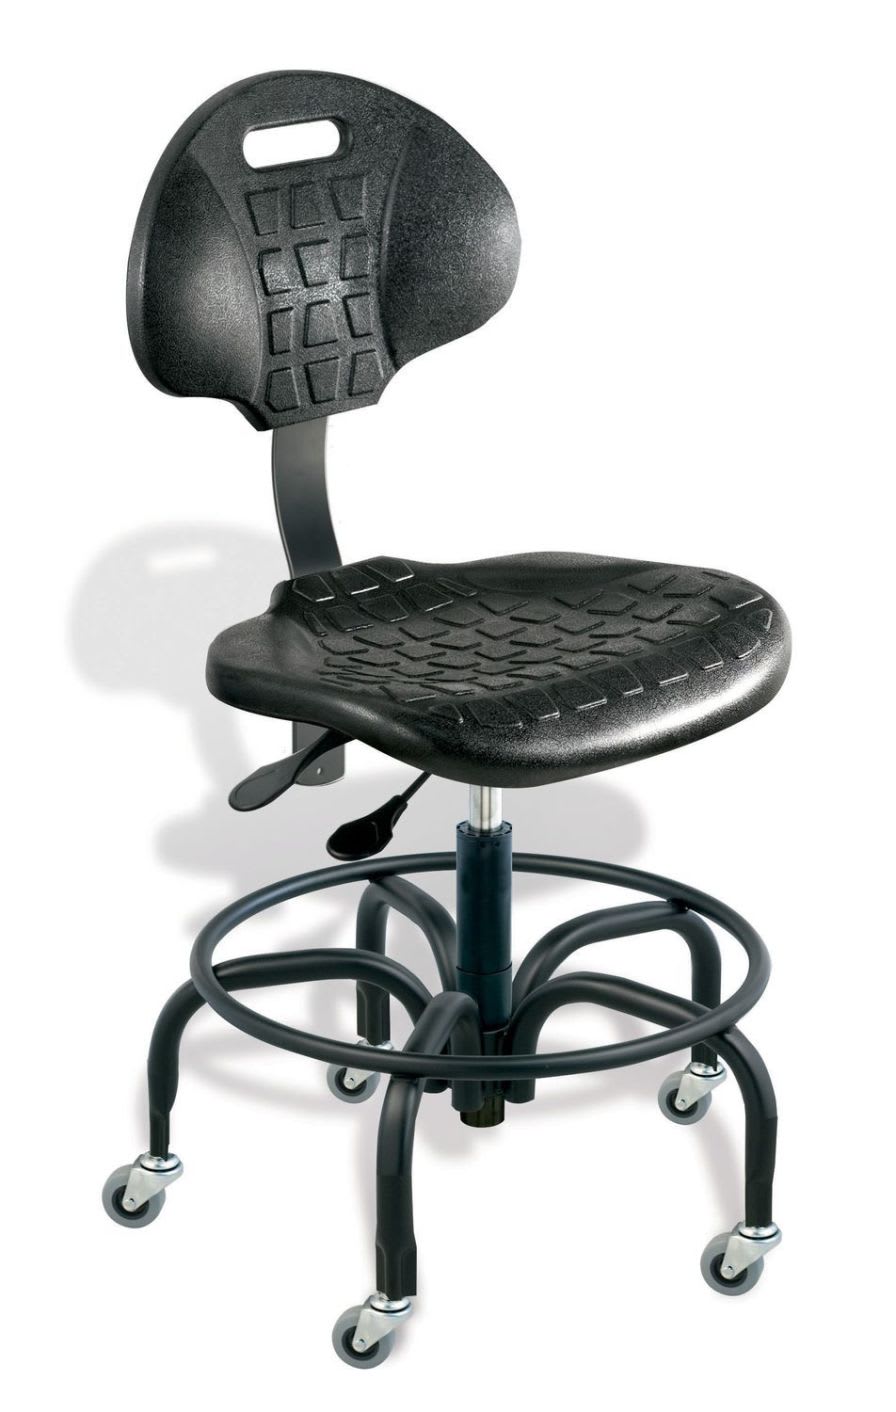 Medical stool / on casters / height-adjustable / with backrest UniqueU UU Series Biofit